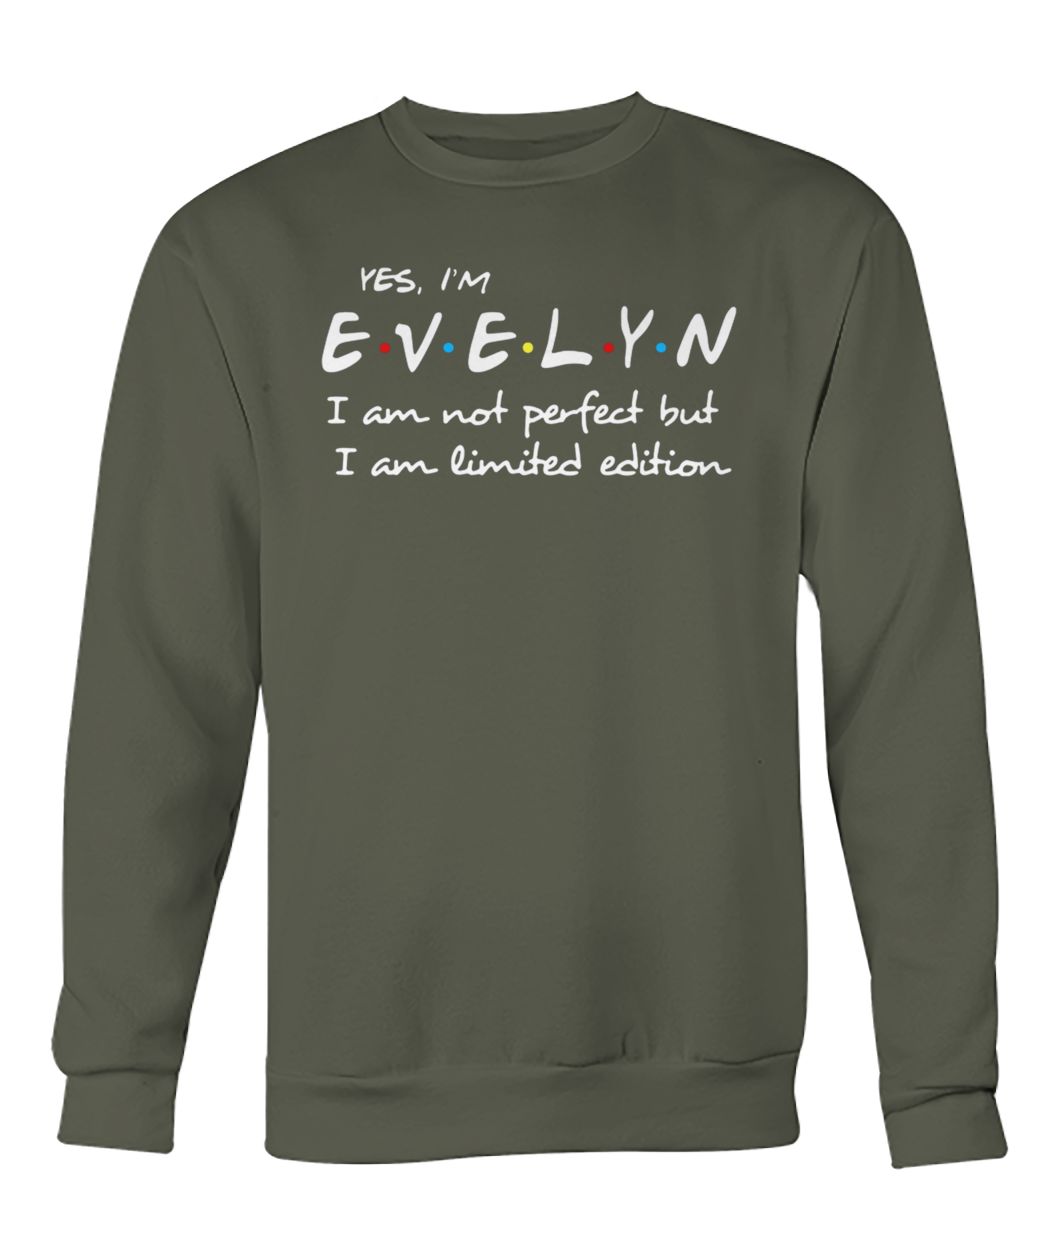 Yes I'm evelyn I am not perfect but I am limited edition crew neck sweatshirt